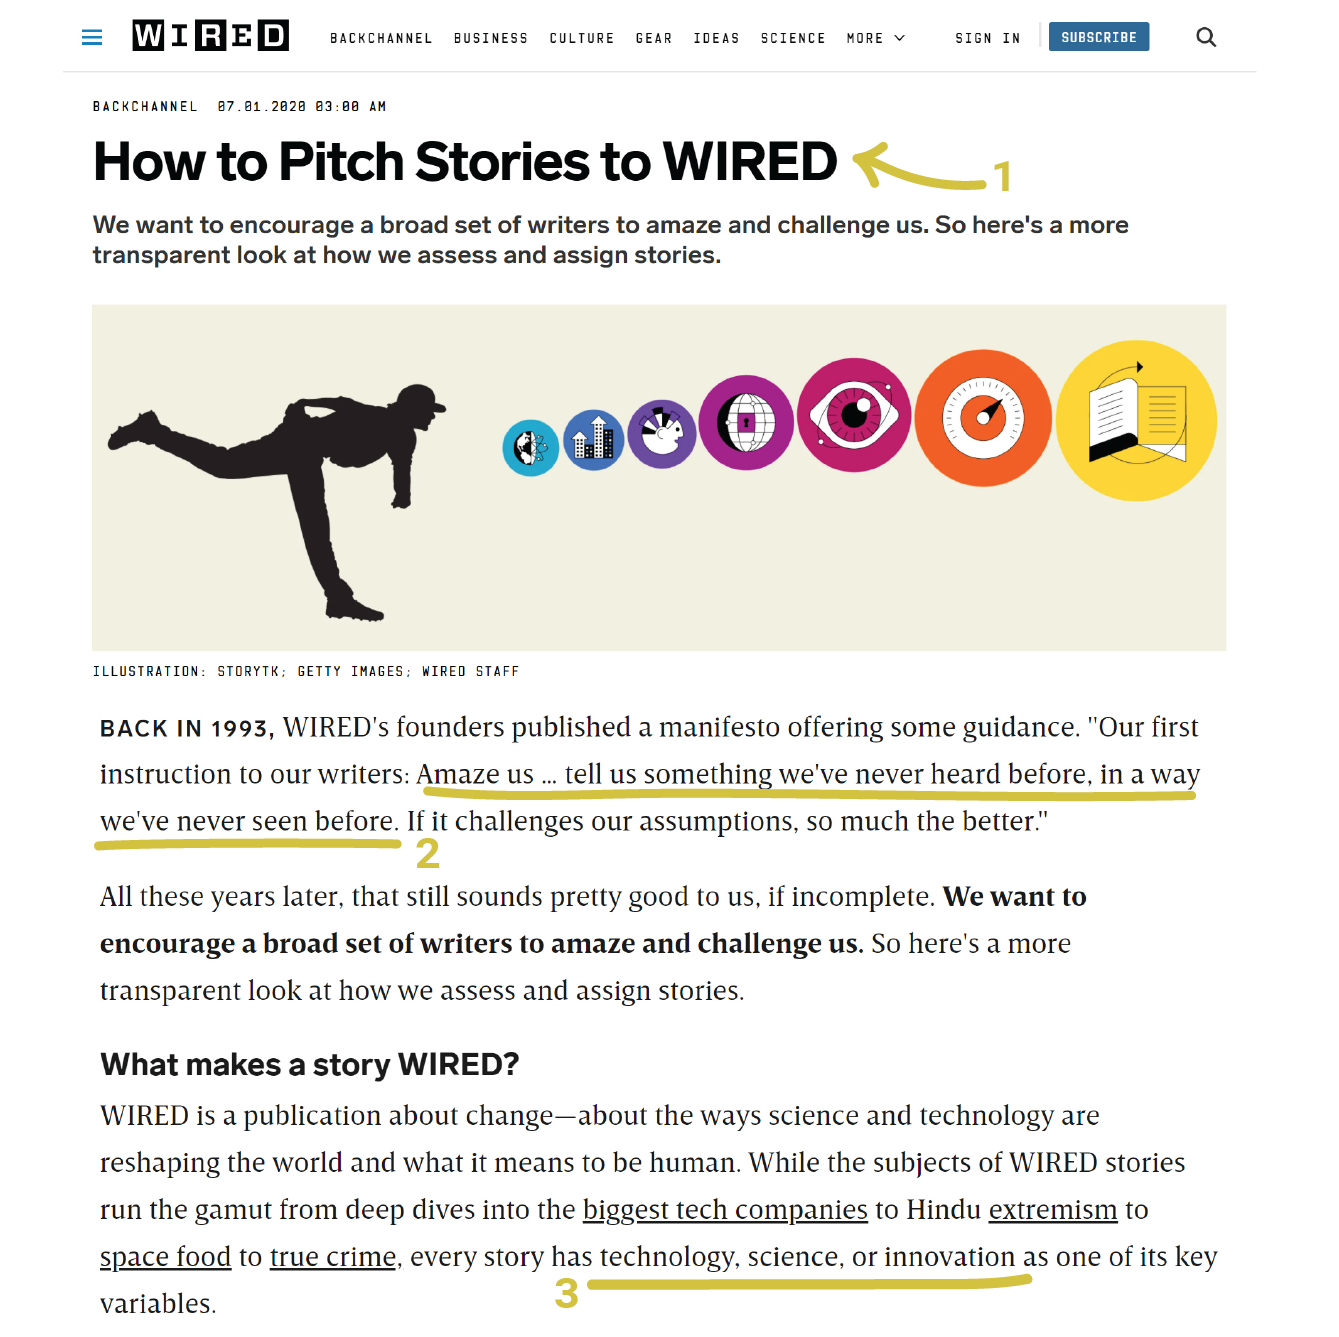 9 PR Tips from WIRED Magazine's Pitching Guide — Wolf Craft